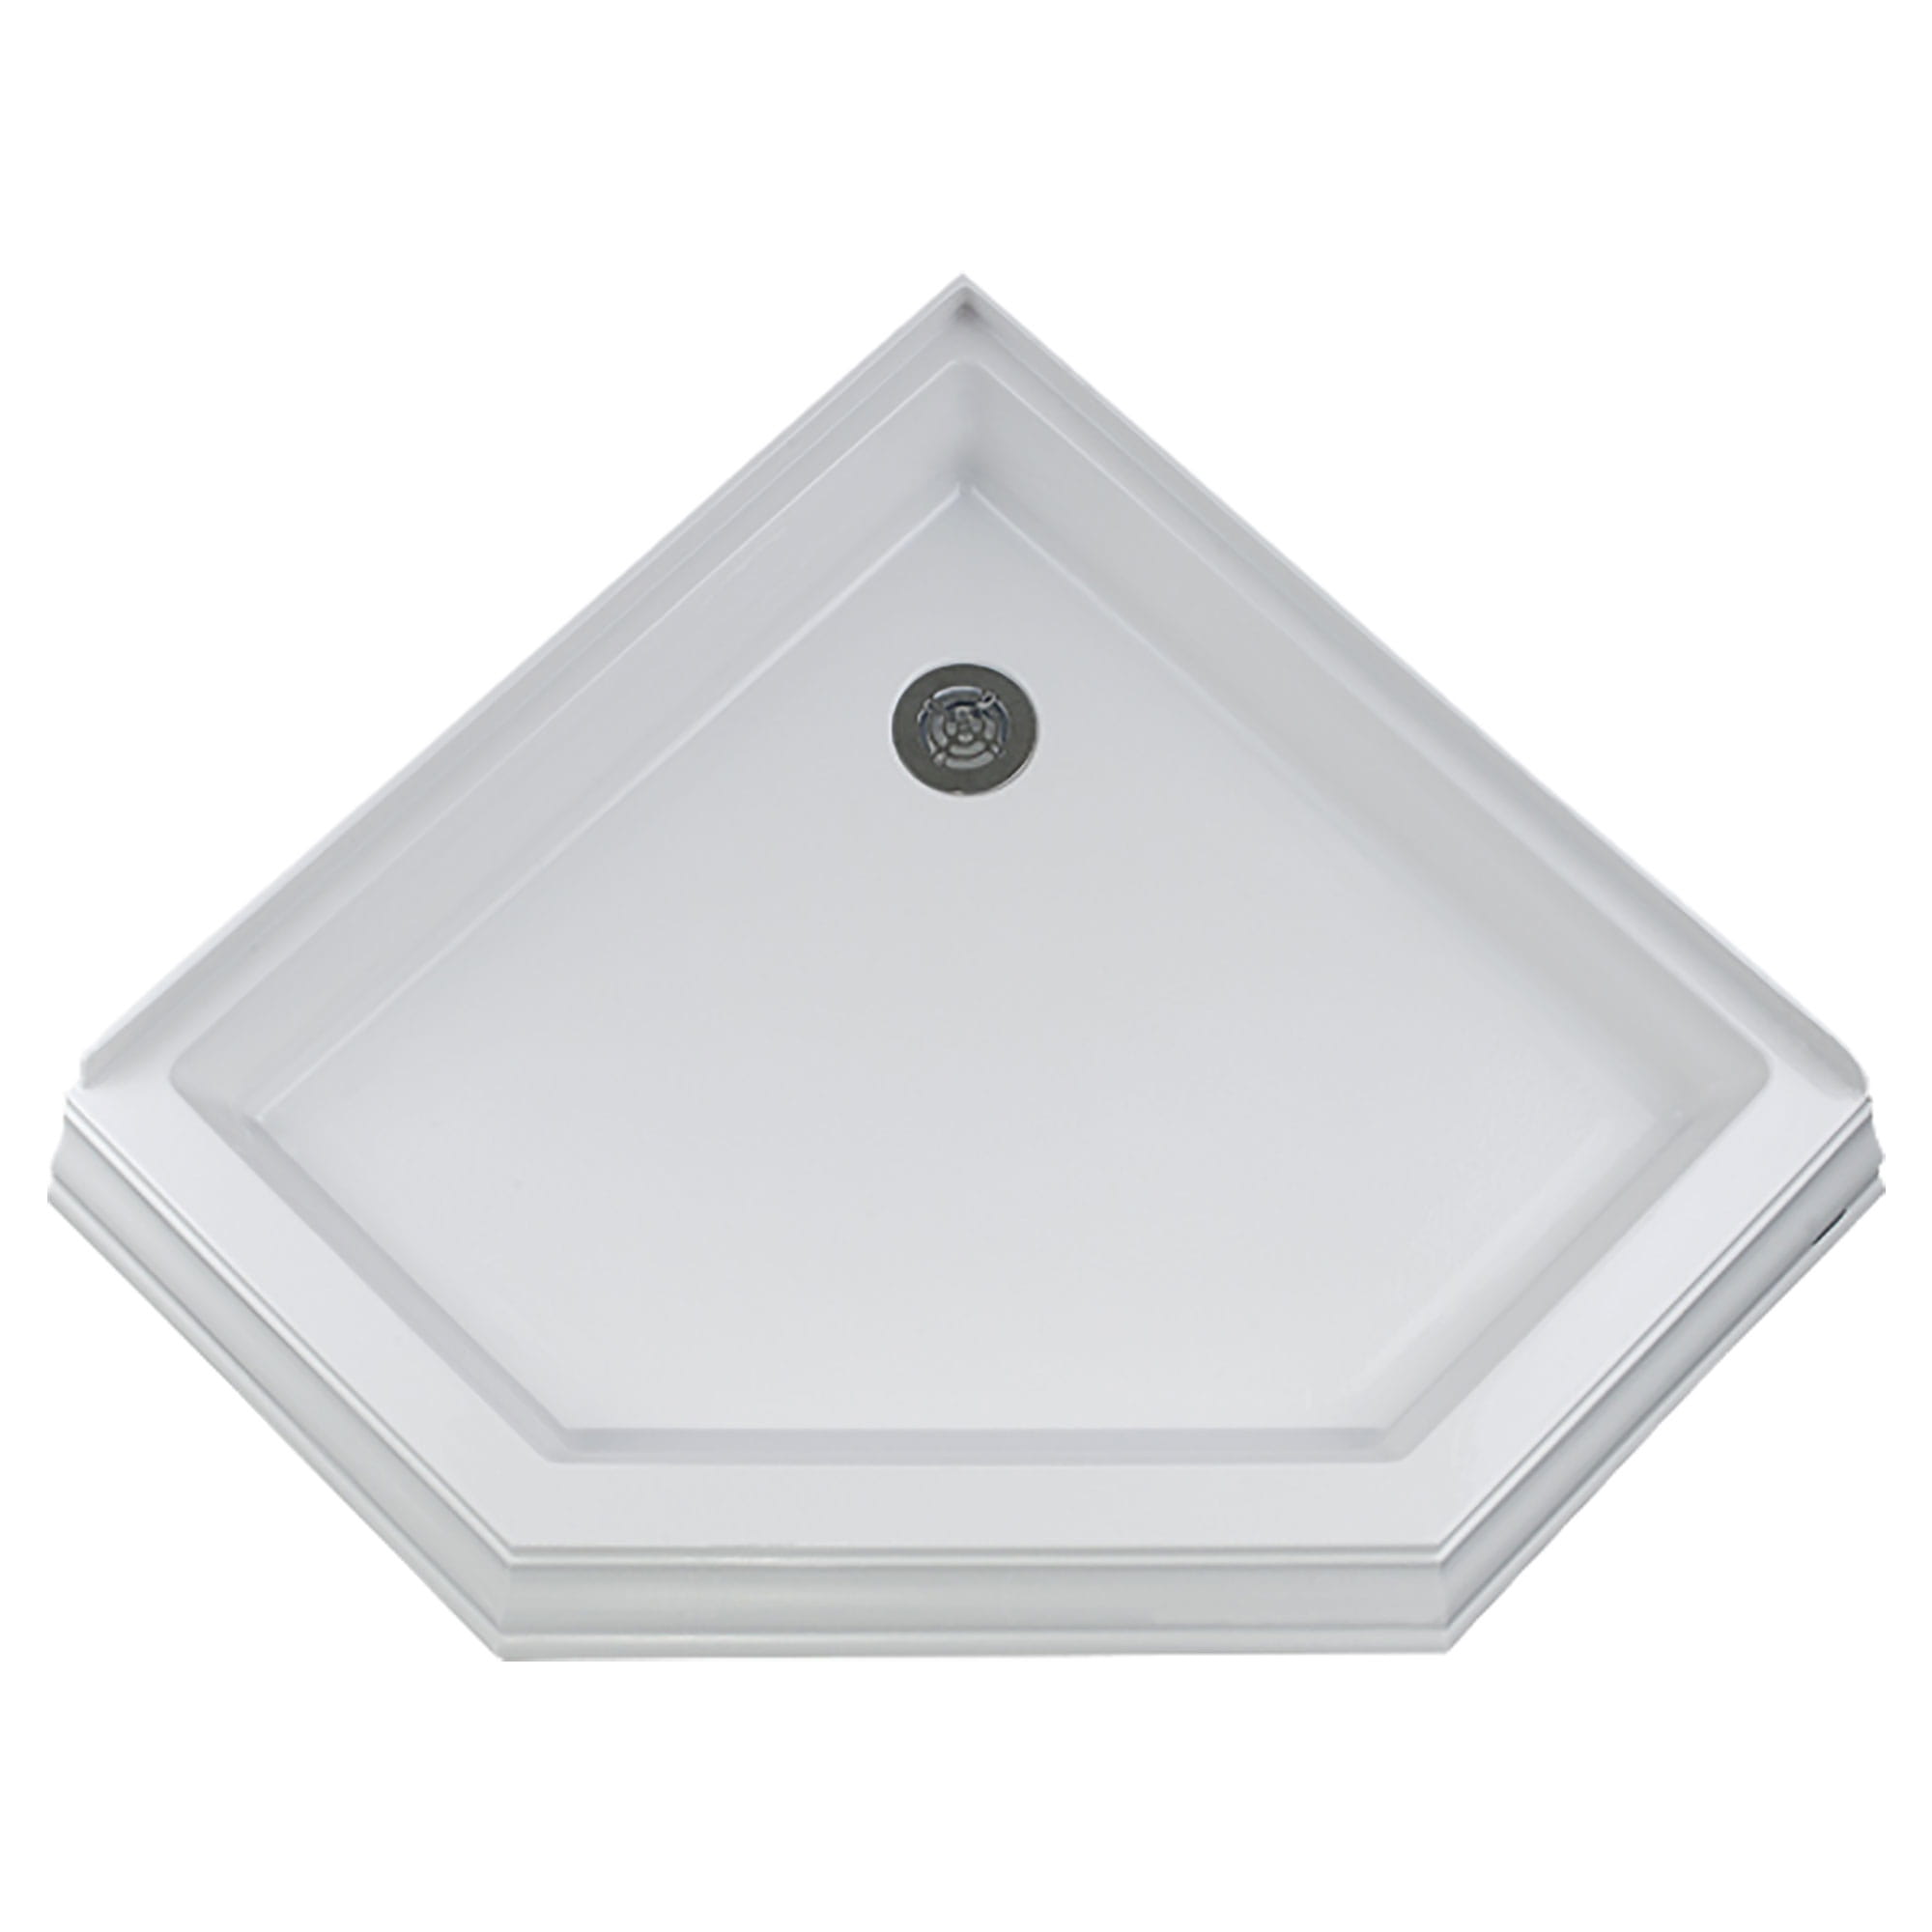 Town Square 38 Inch by 38 Inch Neo Angle Shower Base